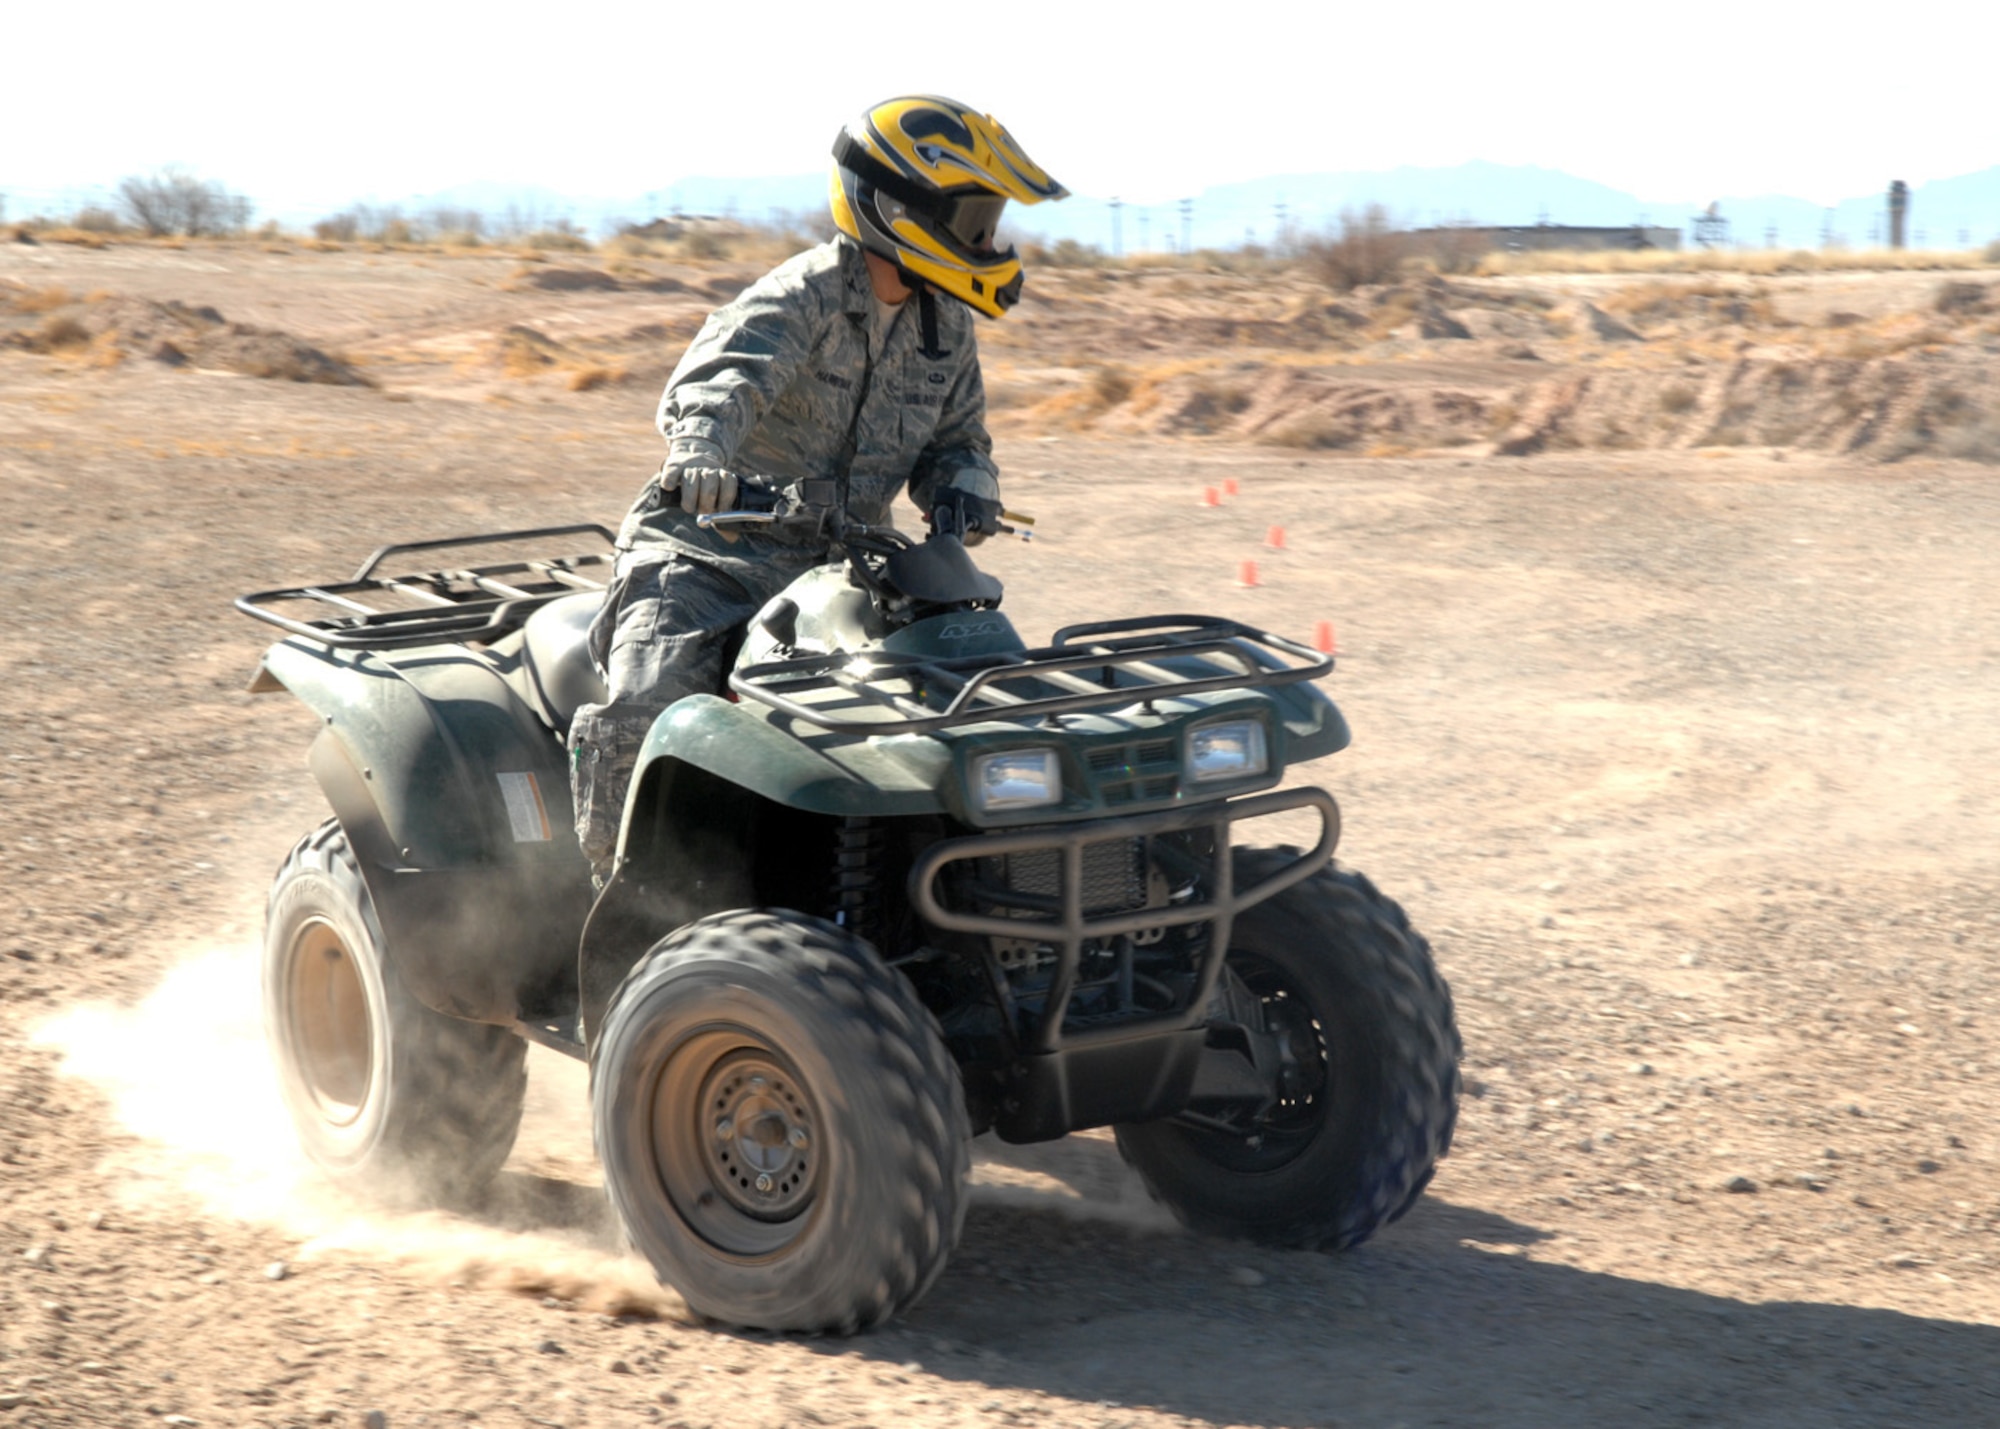 Col. Jeff Harrigian, 49th Fighter Wing commander, rides four wheeler at the Holloman all terrain vehicle and dirtbike track at Holloman Air Force Base, N.M., Jan. 5. As part of Safety Day activities, Airmen recieved an ATV demonstration guided by instructor, Dan Salinas, 49th FW Safety Office. (U.S. Air Force photo/Airman 1st Class Veronica Salgado)